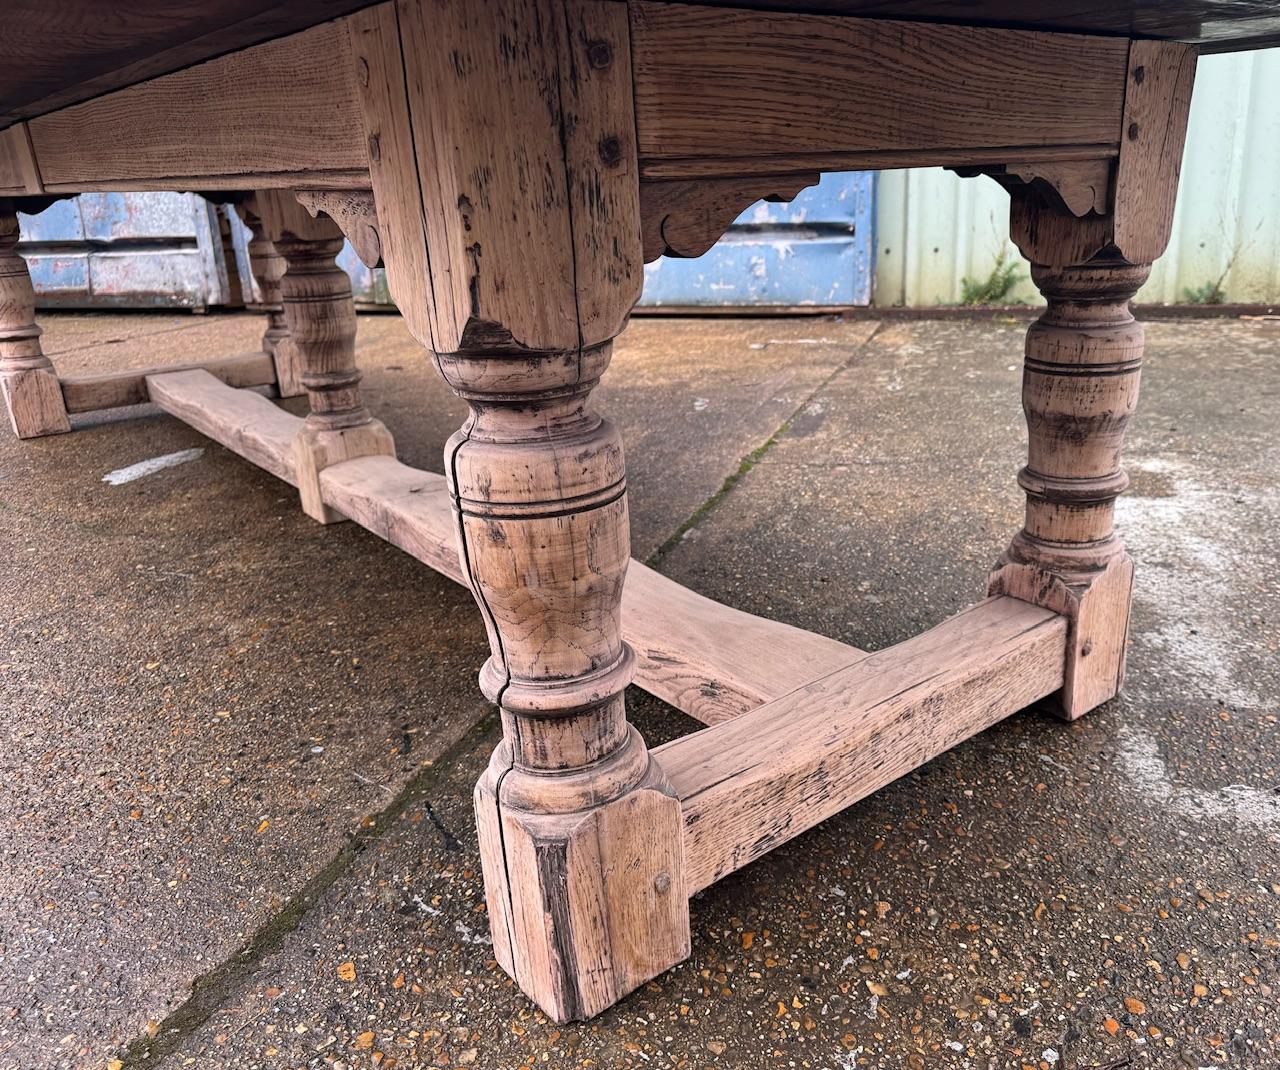 We are pleased to offer this 3.8 Meter Solid Oak Farmhouse Dining Table, not only long but deep also, dating to the early 1900s and of excellent quality pegged construction this table will be around for generations to come. We have bleached it for a